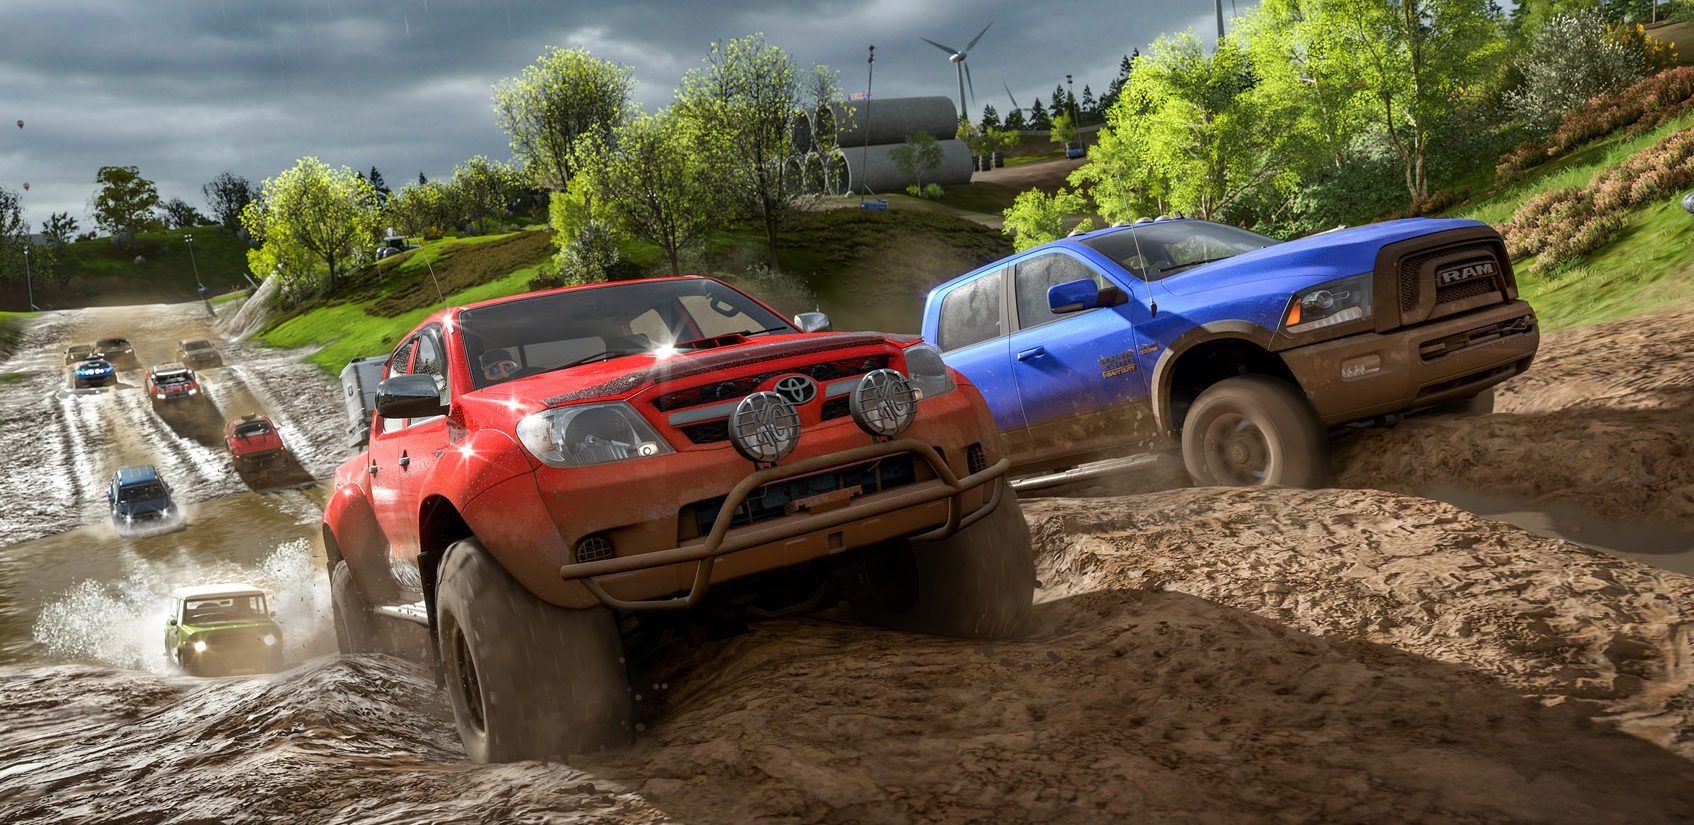 Forza Horizon 4 Review: The Best Open World Racing Game In Years